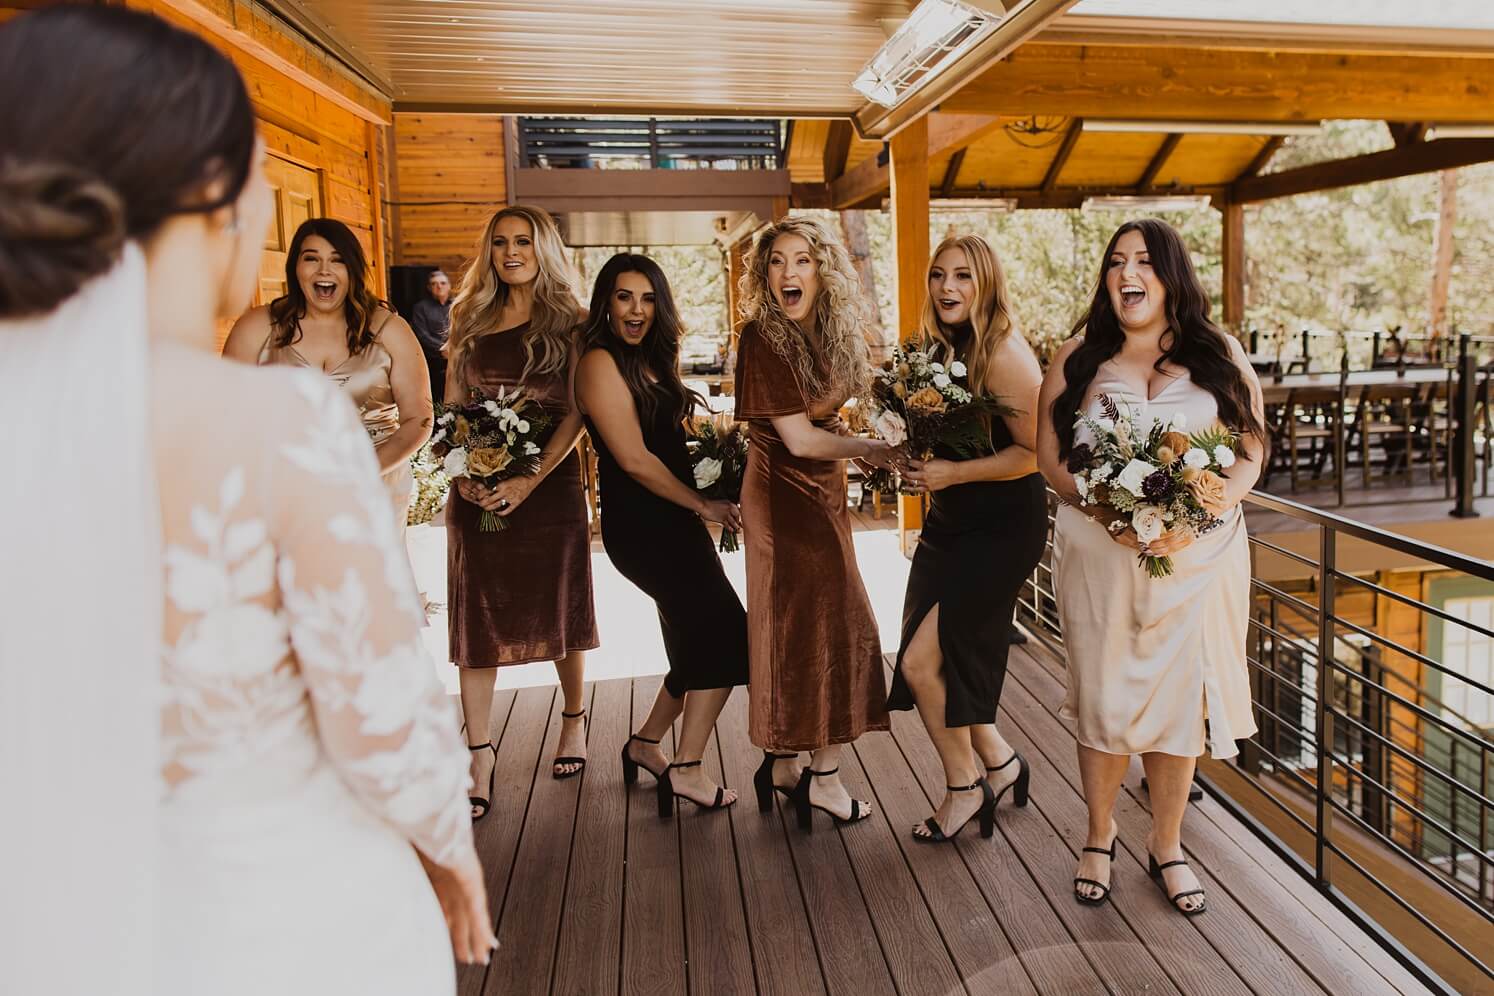 Bridesmaids seeing bride for the first time | McArthur Weddings and Events